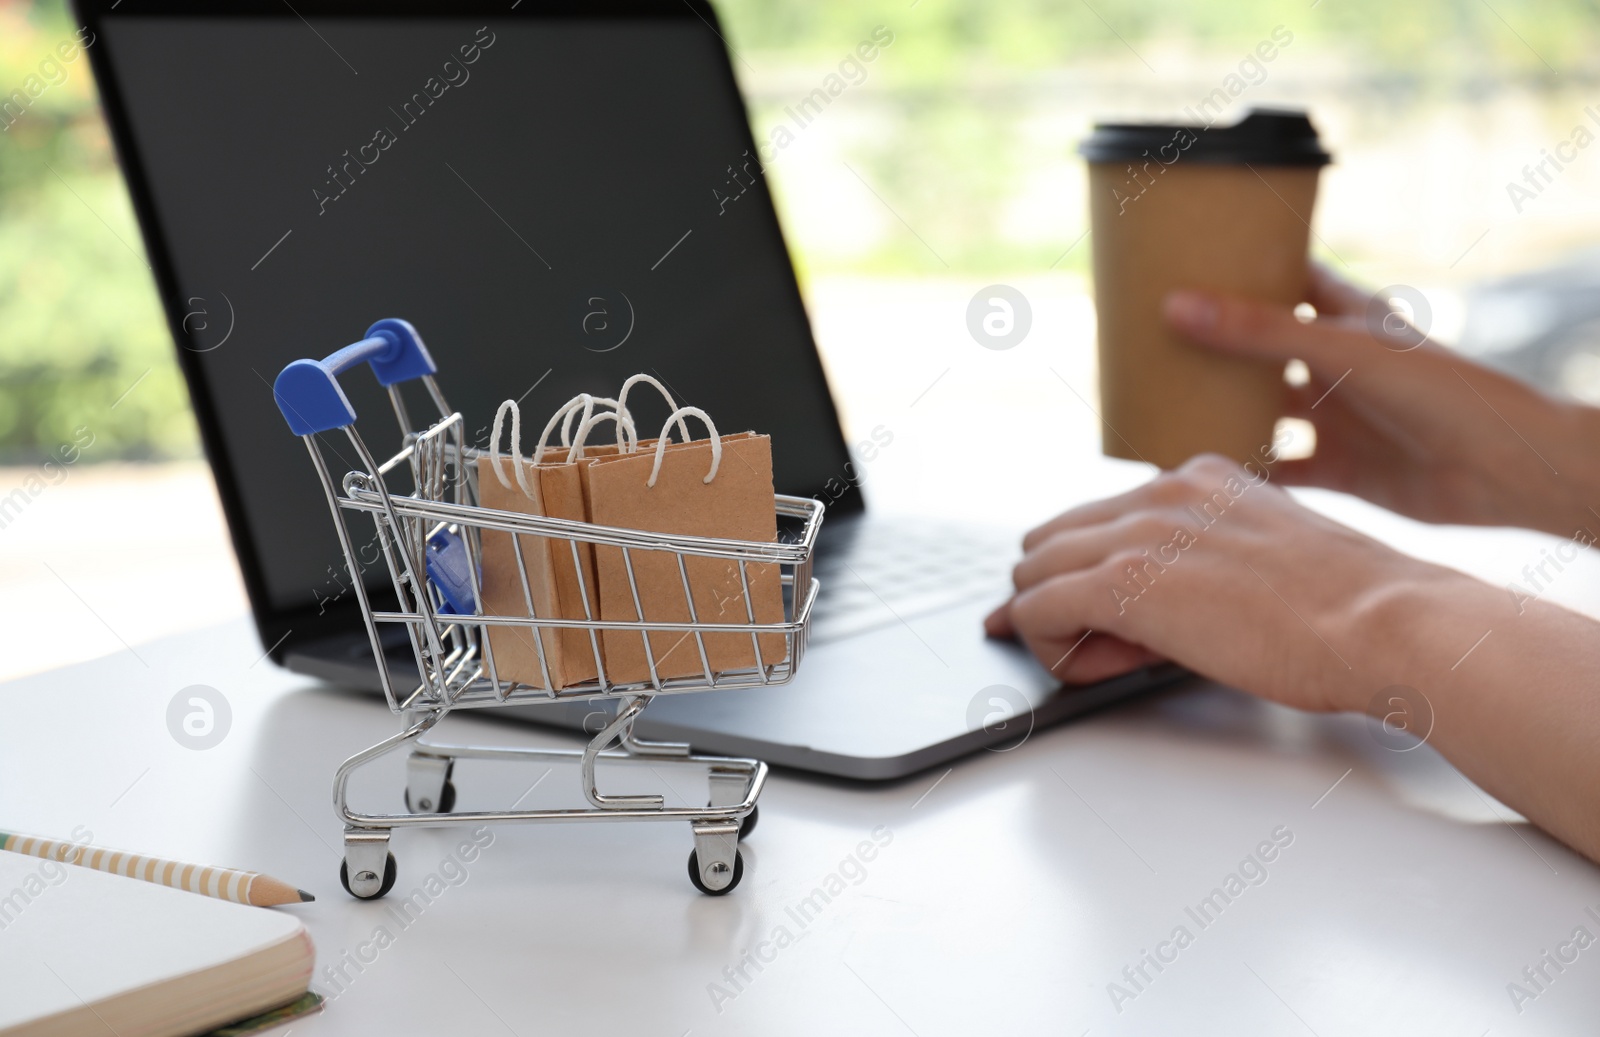 Photo of Internet shopping. Small cart with bags near woman using laptop indoors